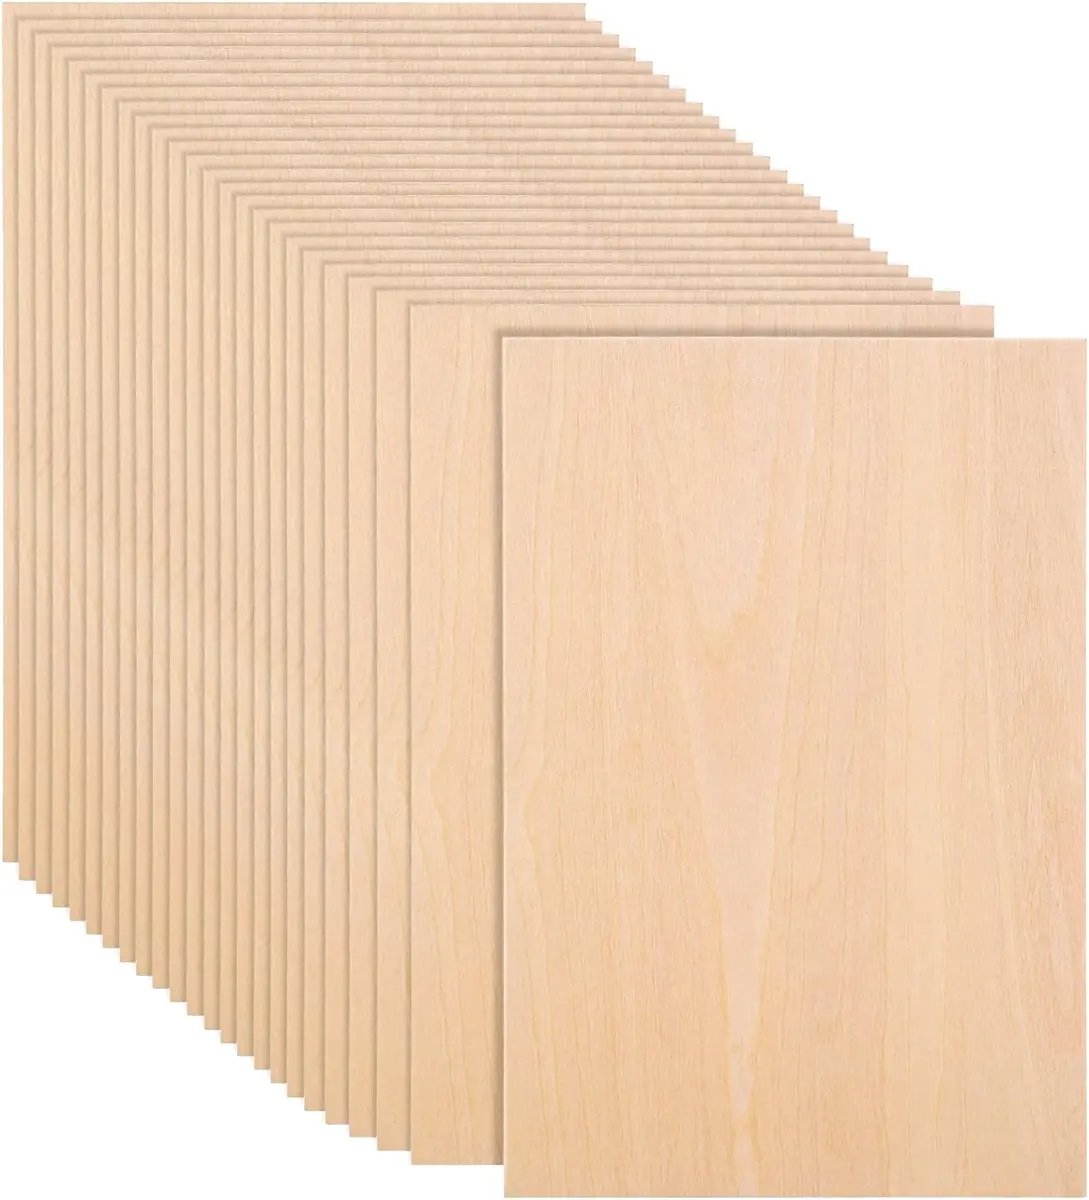 25 Pack 8 x 12 Inch Basswood Sheets, 1/16 Thin Craft Plywood